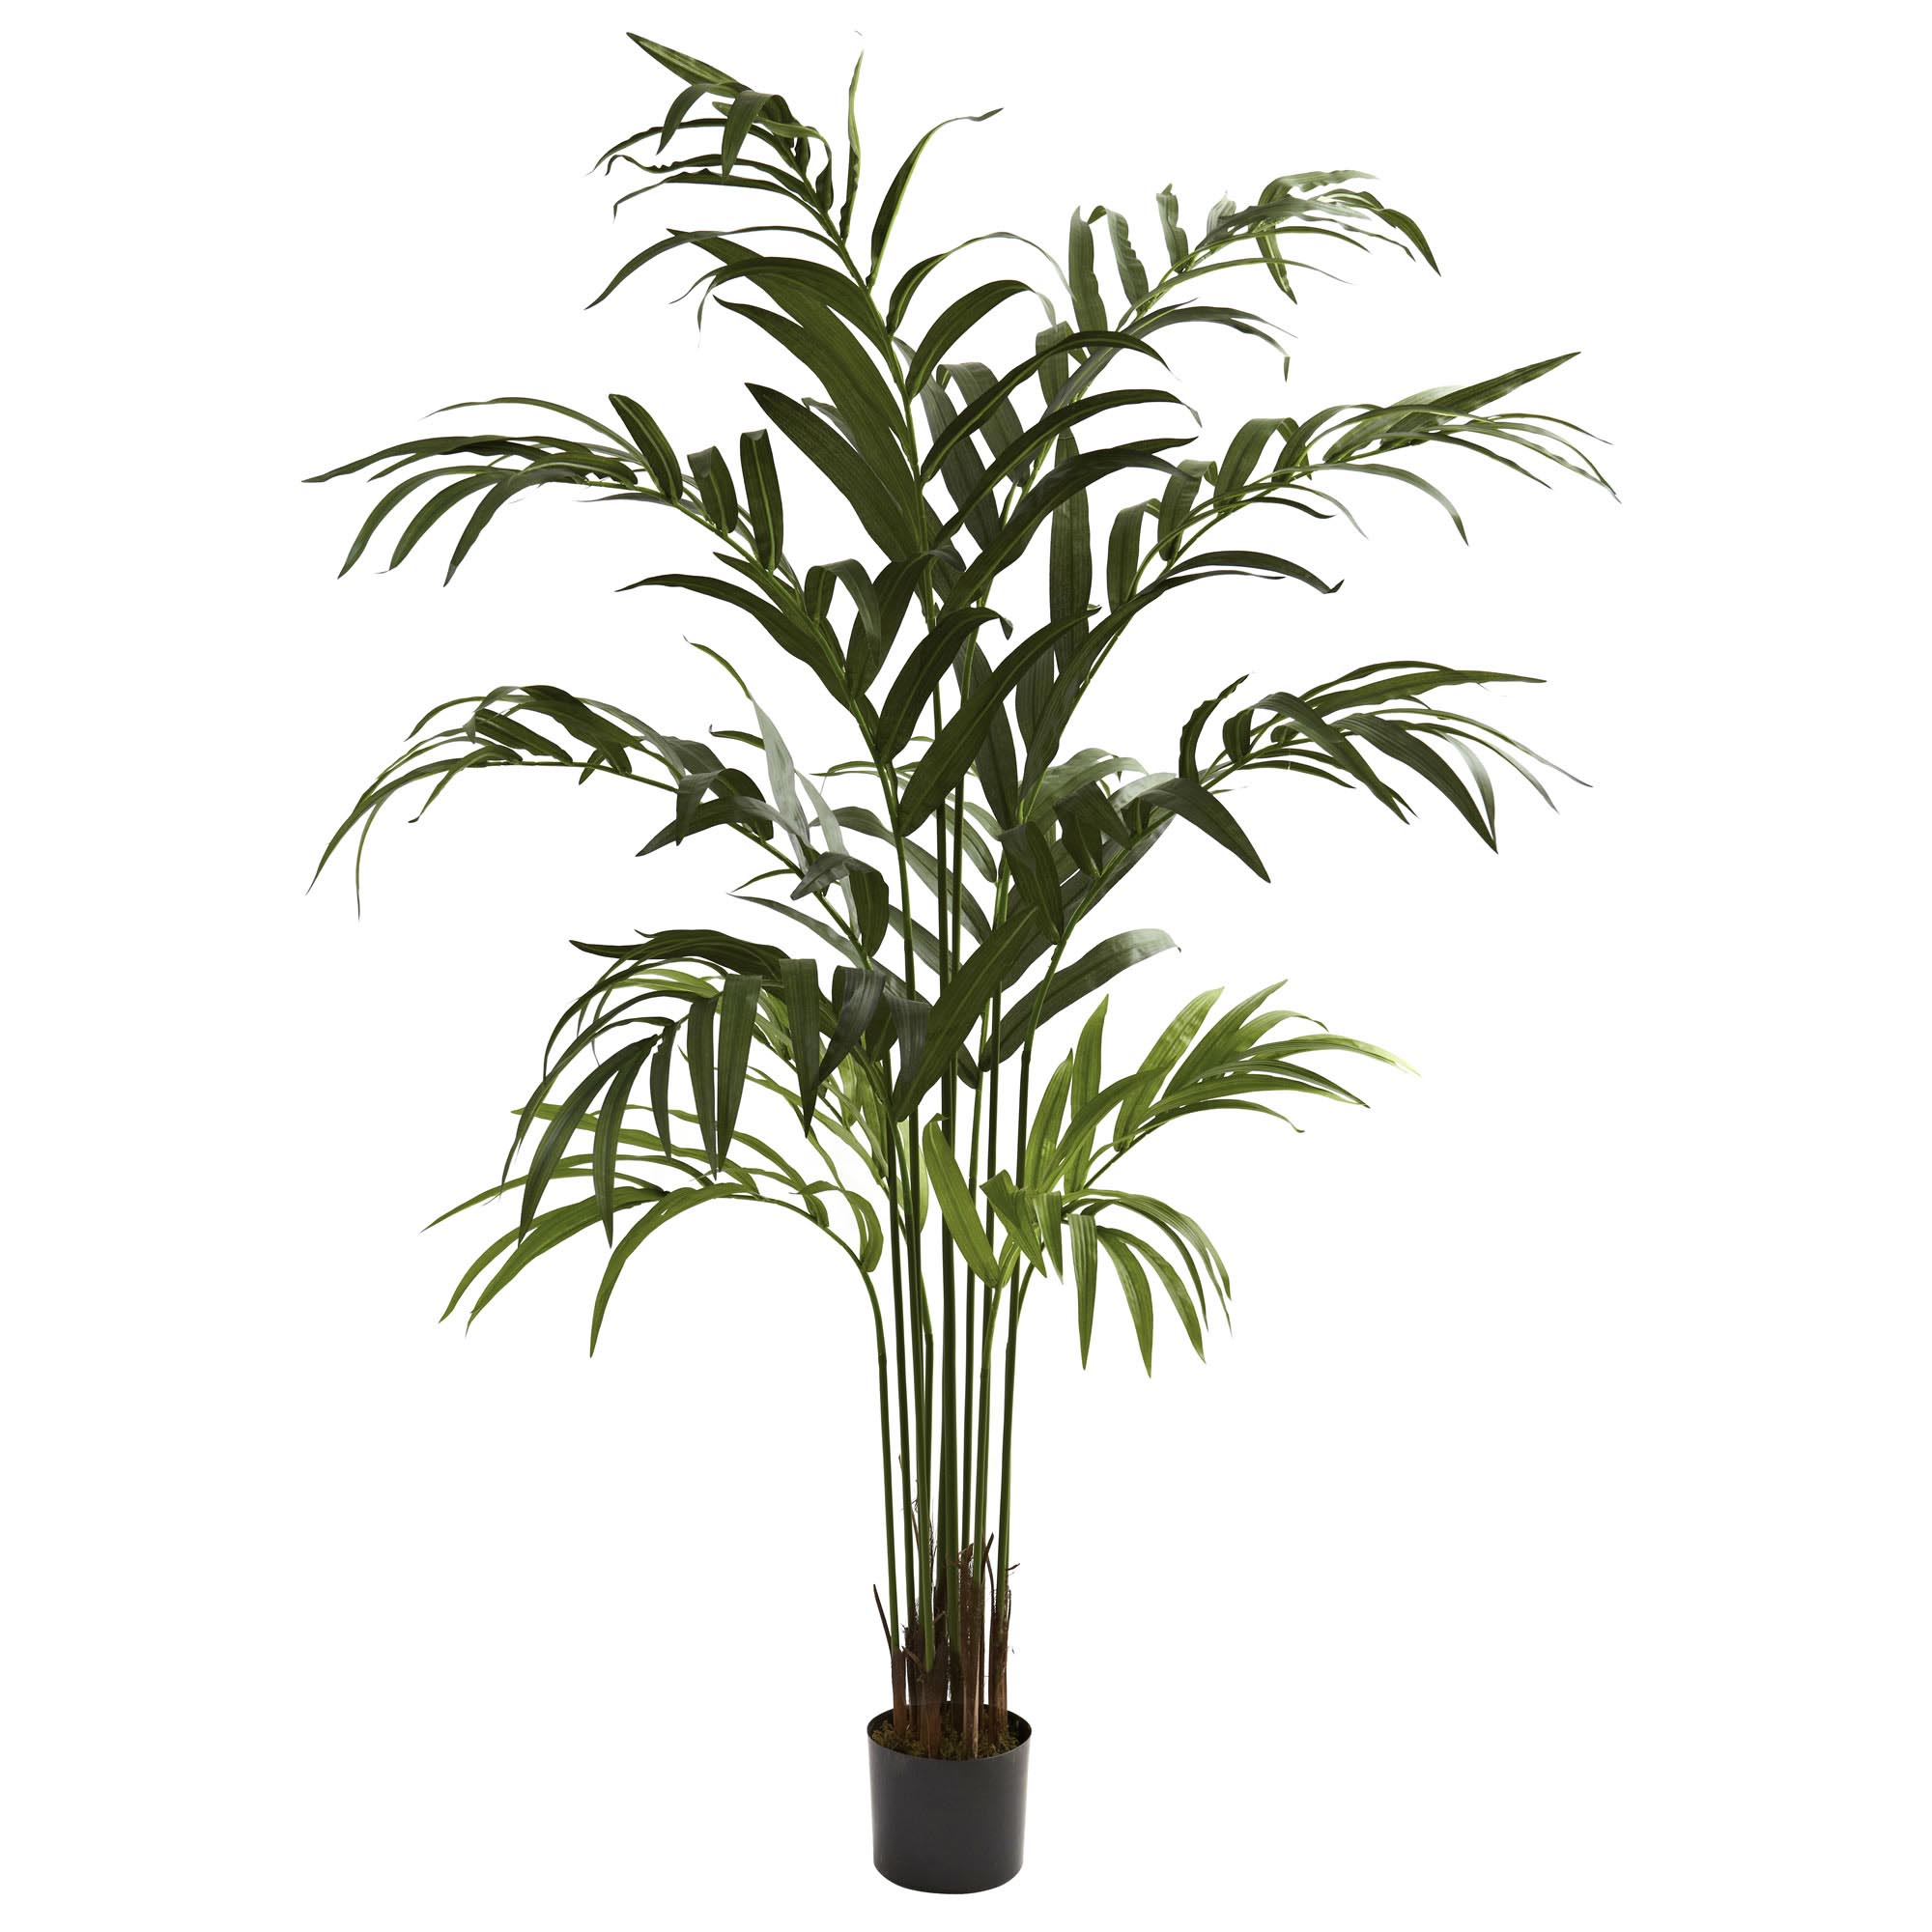 6 Foot Artificial Kentia Palm Tree: Potted